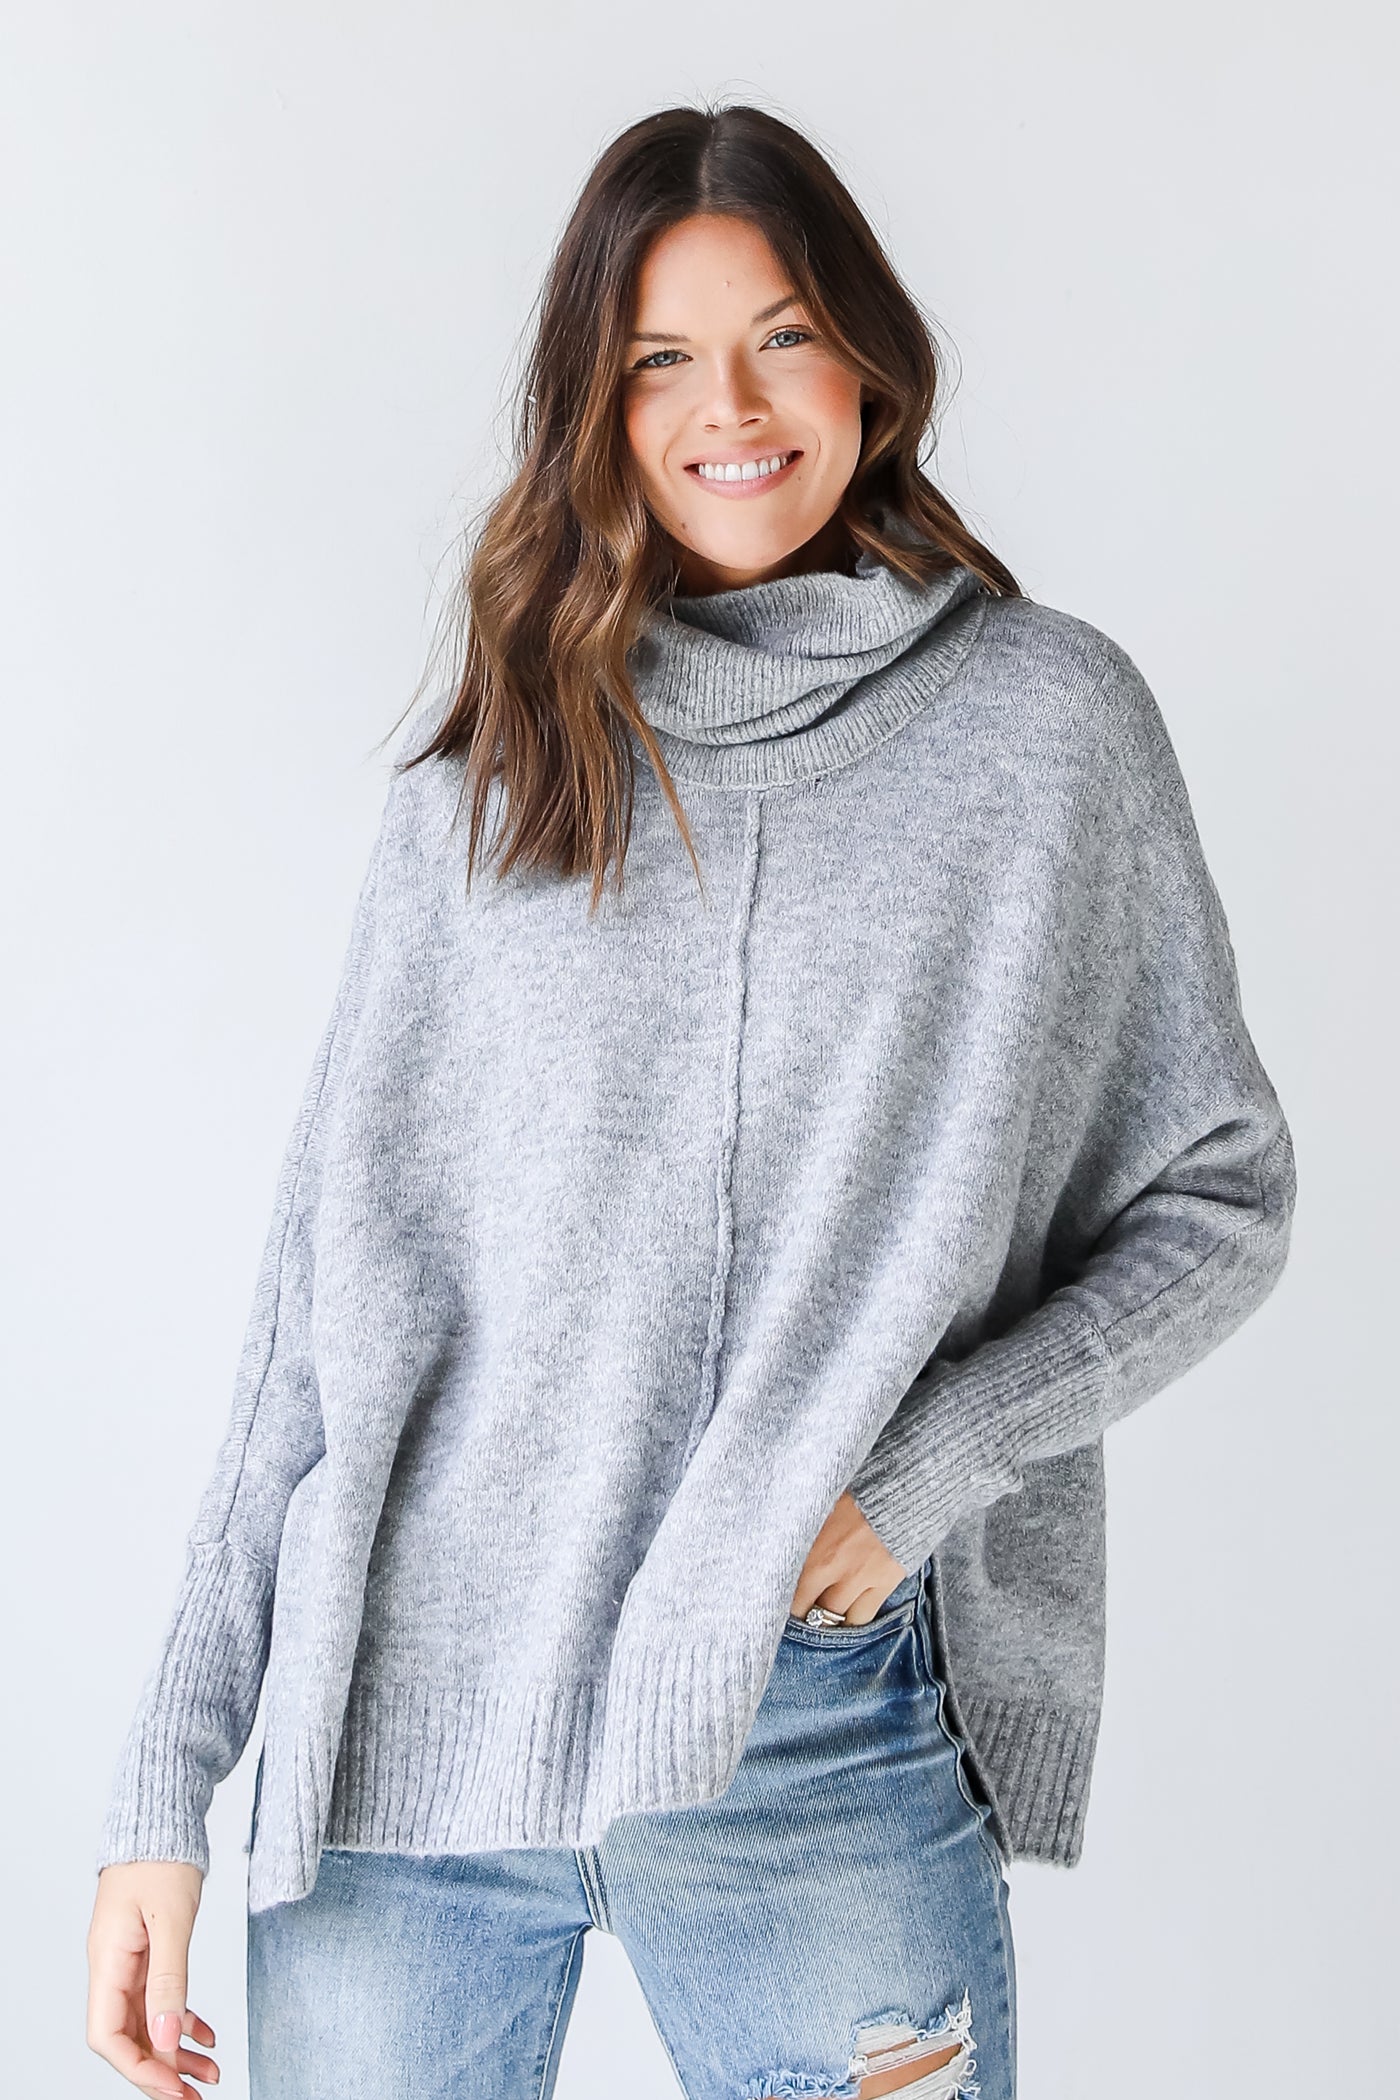 Sweater in heather grey front view